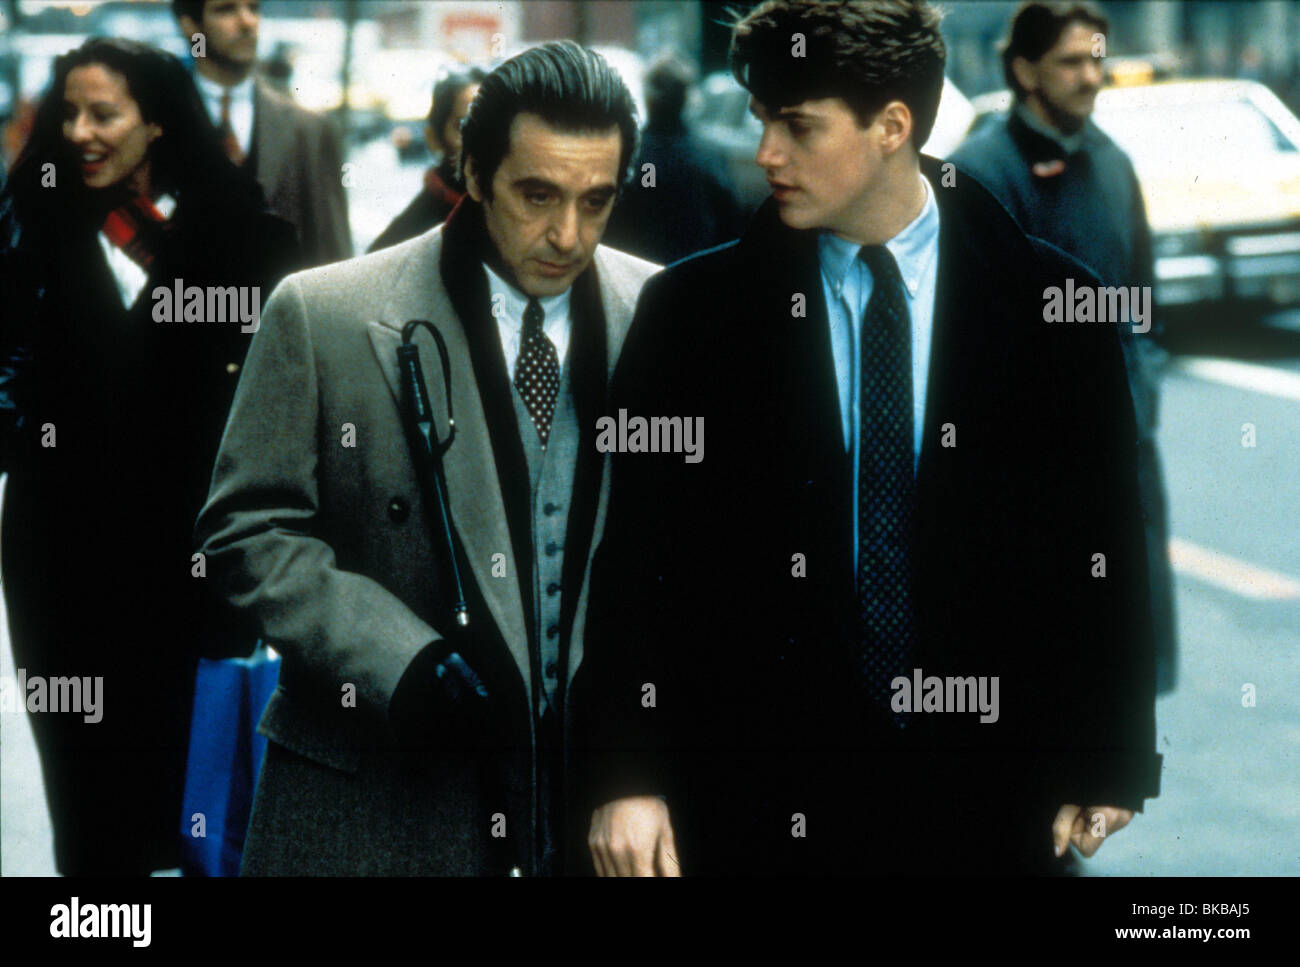 SCENT OF A WOMAN (1992) AL PACINO, CHRIS O'DONNELL SCW 079 Stock Photo